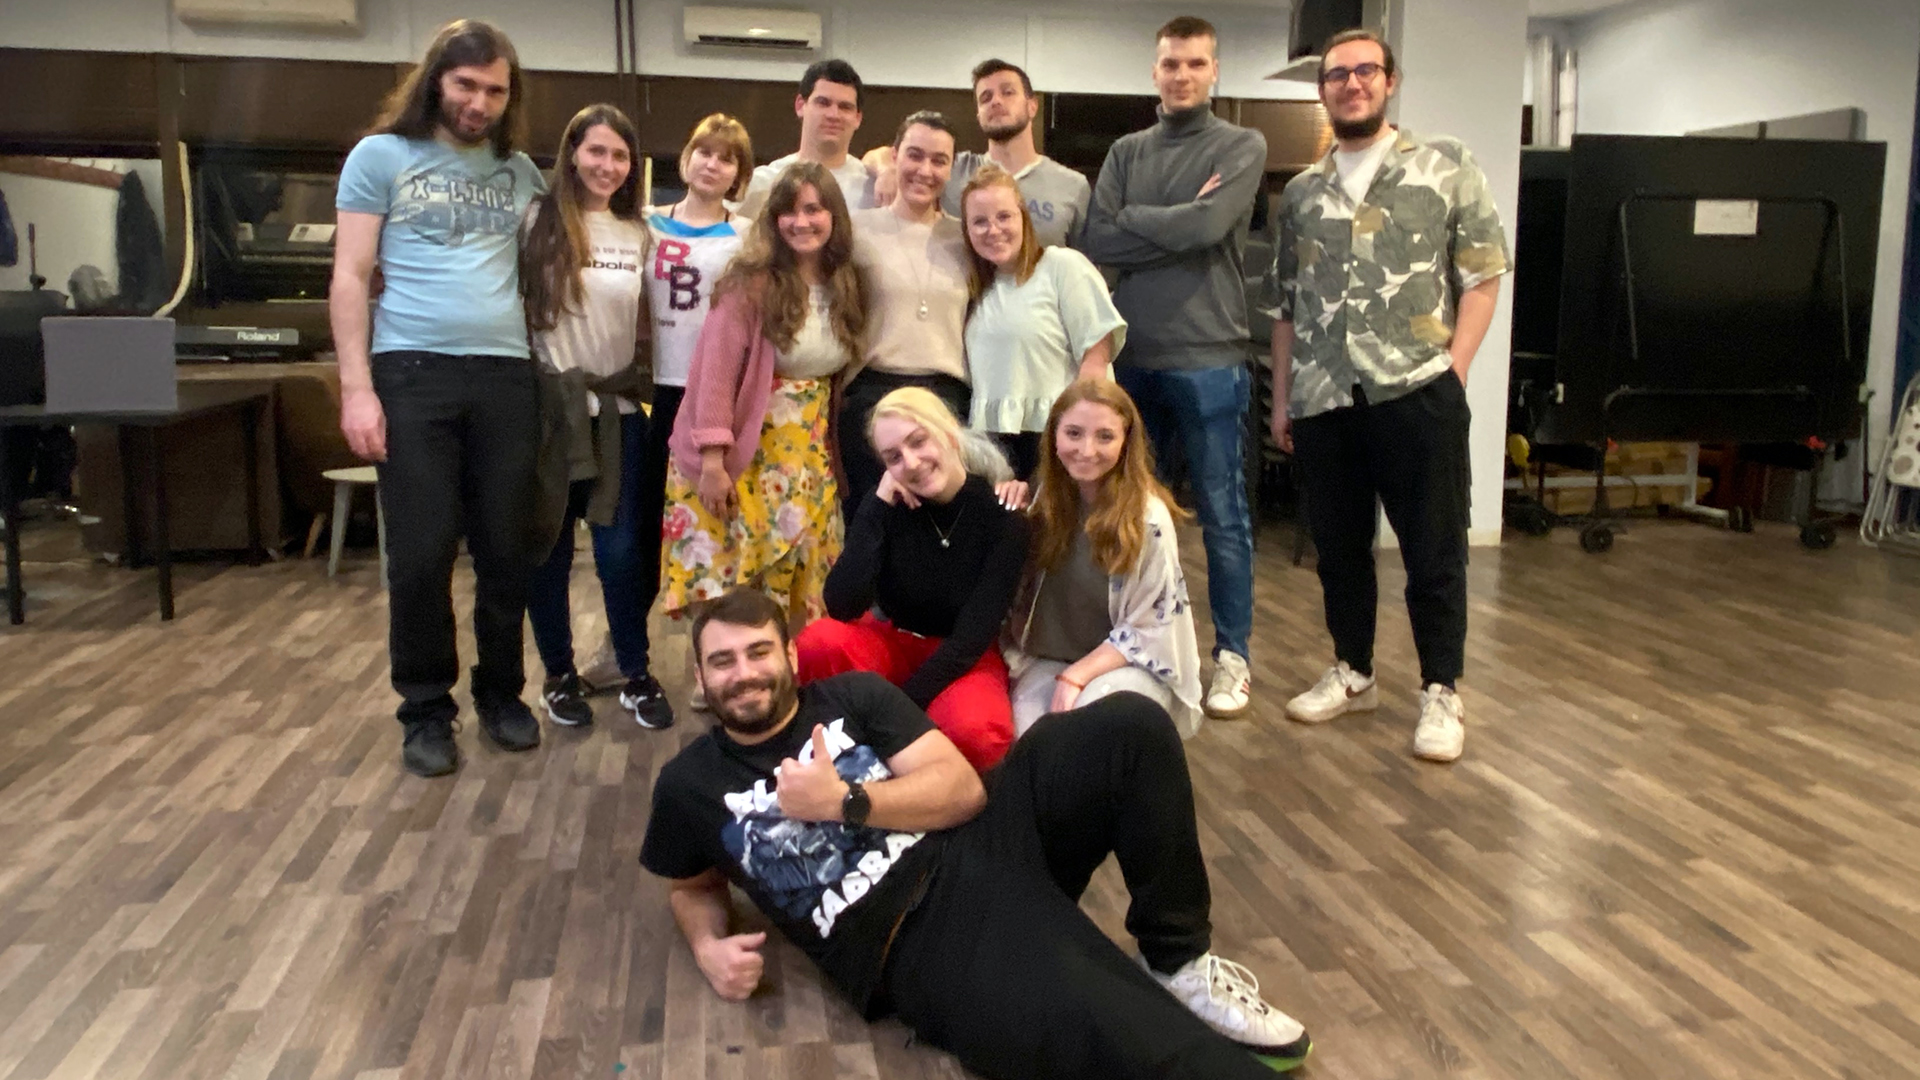 Students meet for a game night near the university in the Balkans. This summer, volunteers will help the team open a new office space closer to campus that will serve as a student center. They will host more game nights, offer study space and will be a “hang-out” for students.